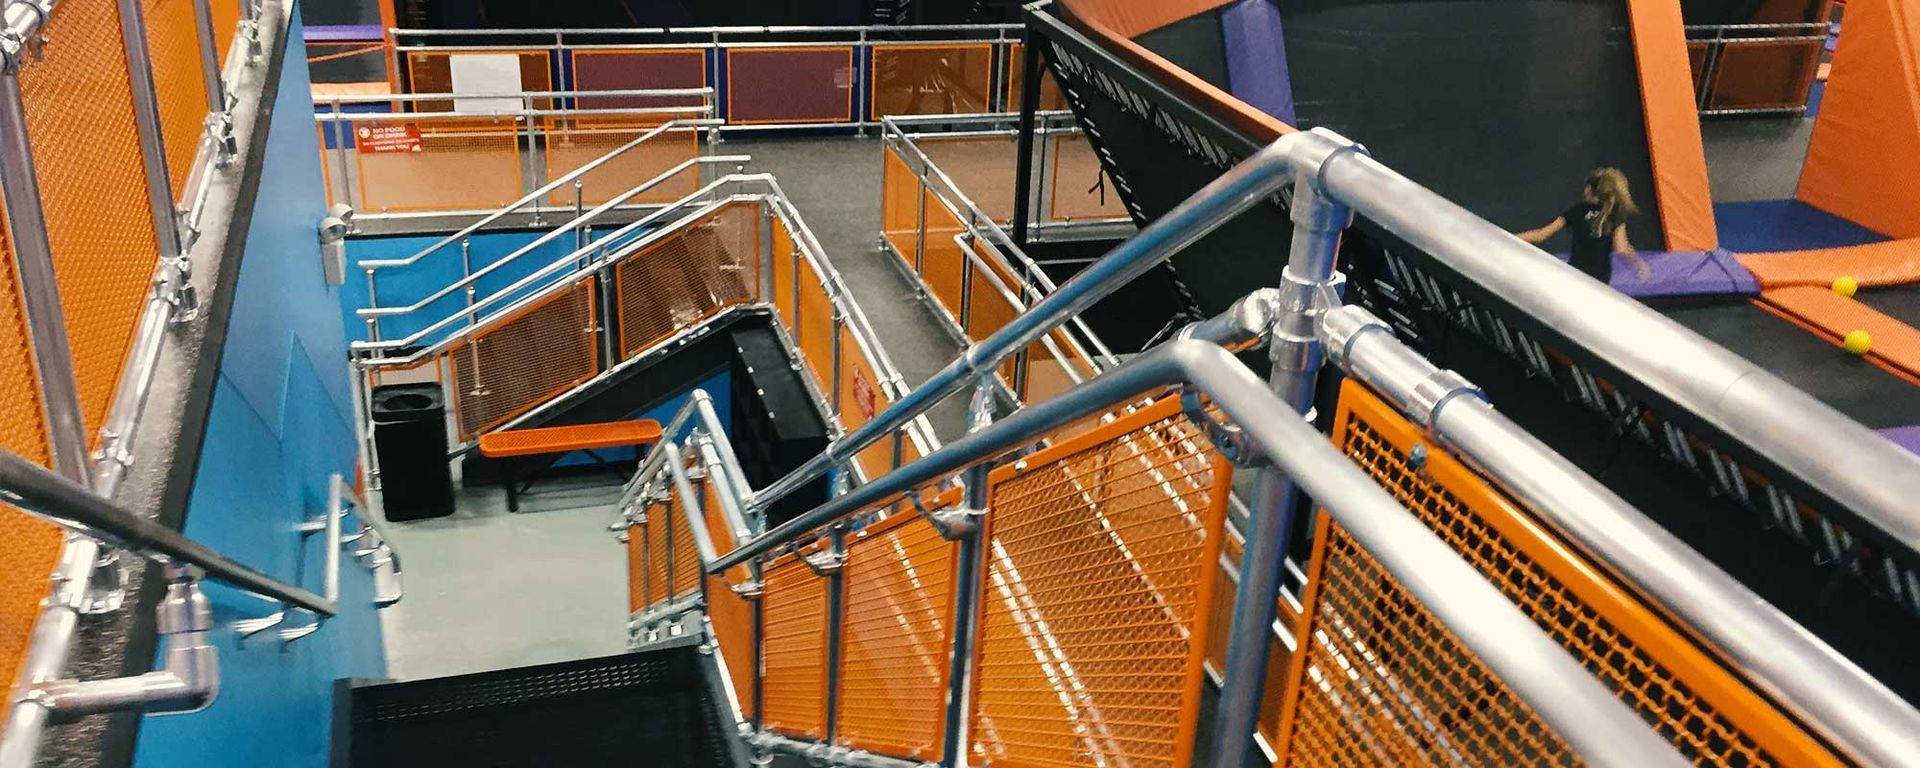 steel railings of stairs at an indoor sports/play facility